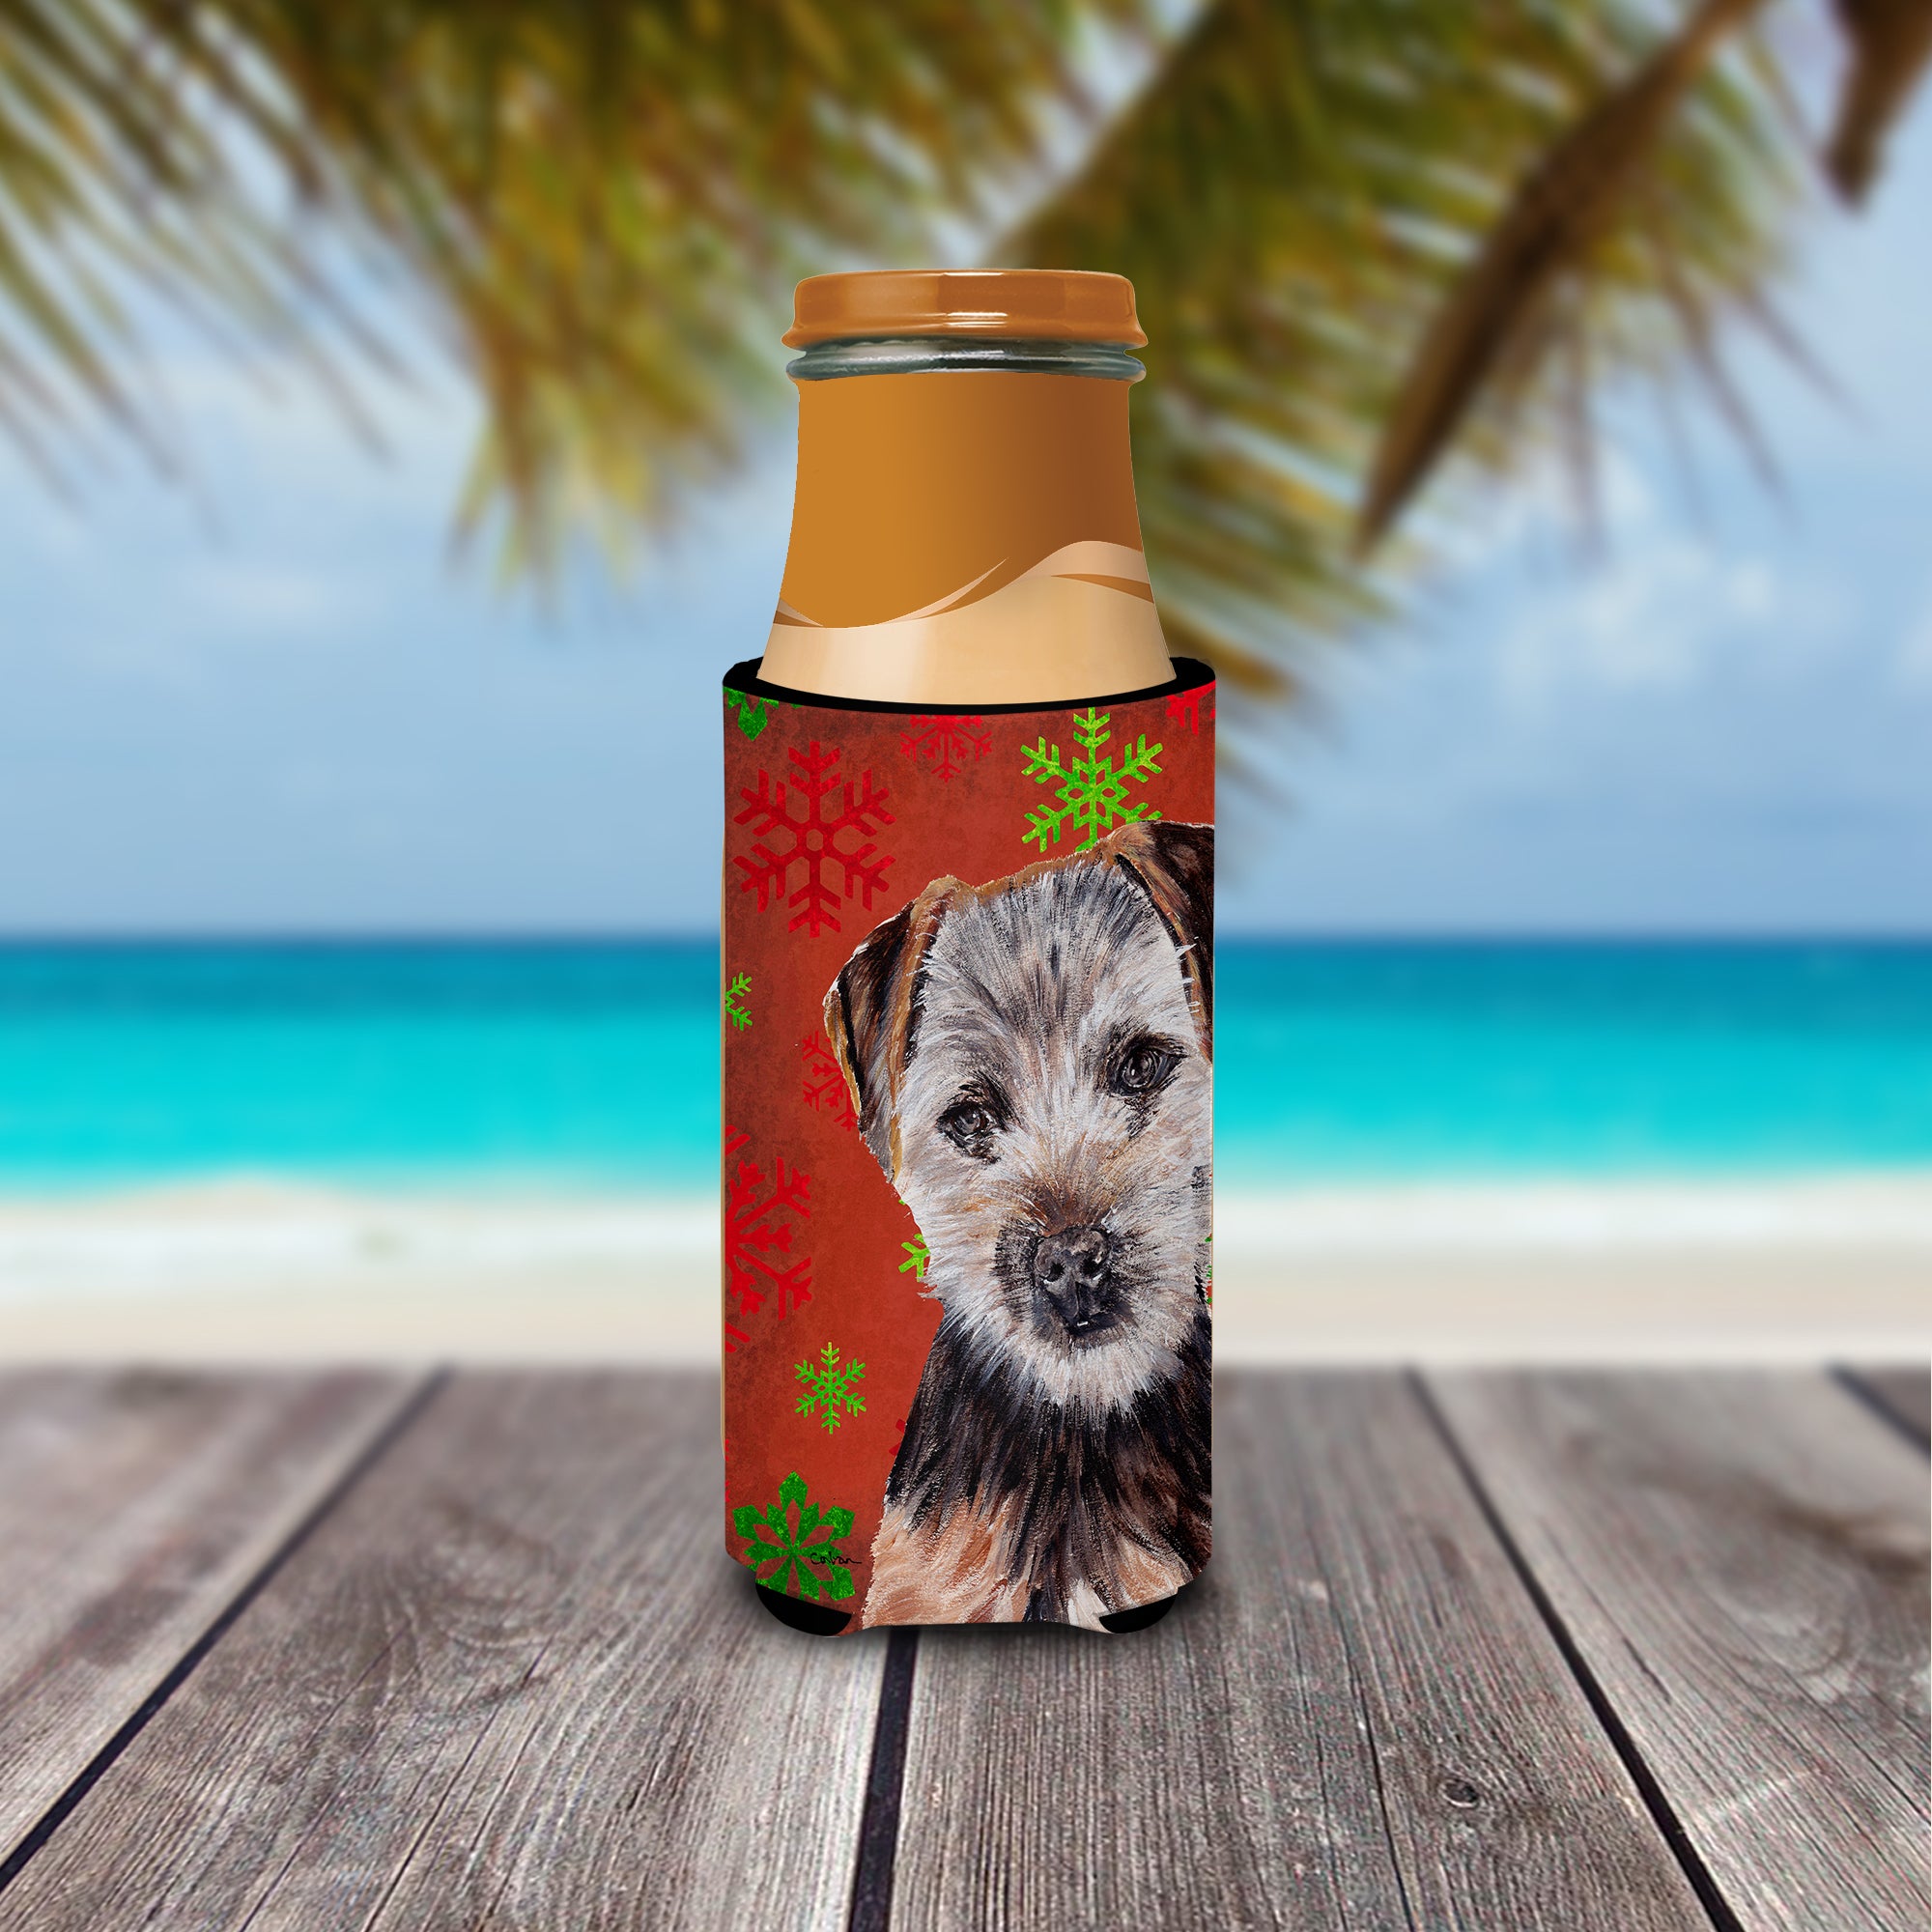 Norfolk Terrier Puppy Red Snowflakes Holiday Ultra Beverage Insulators for slim cans SC9759MUK.